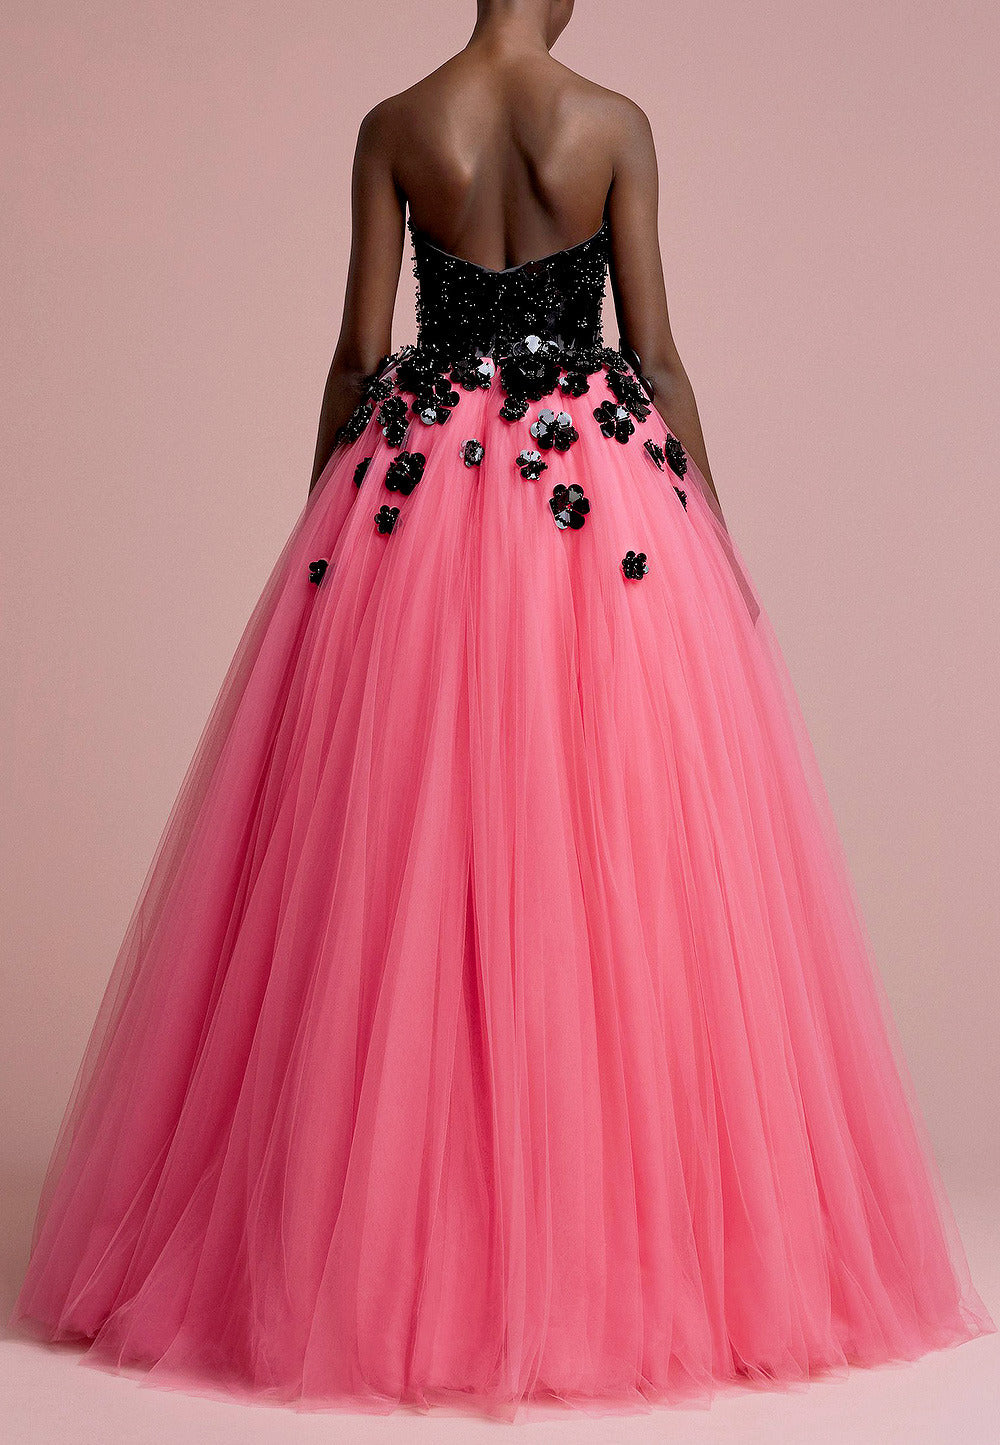 Encrusted Flower Tulle Gown